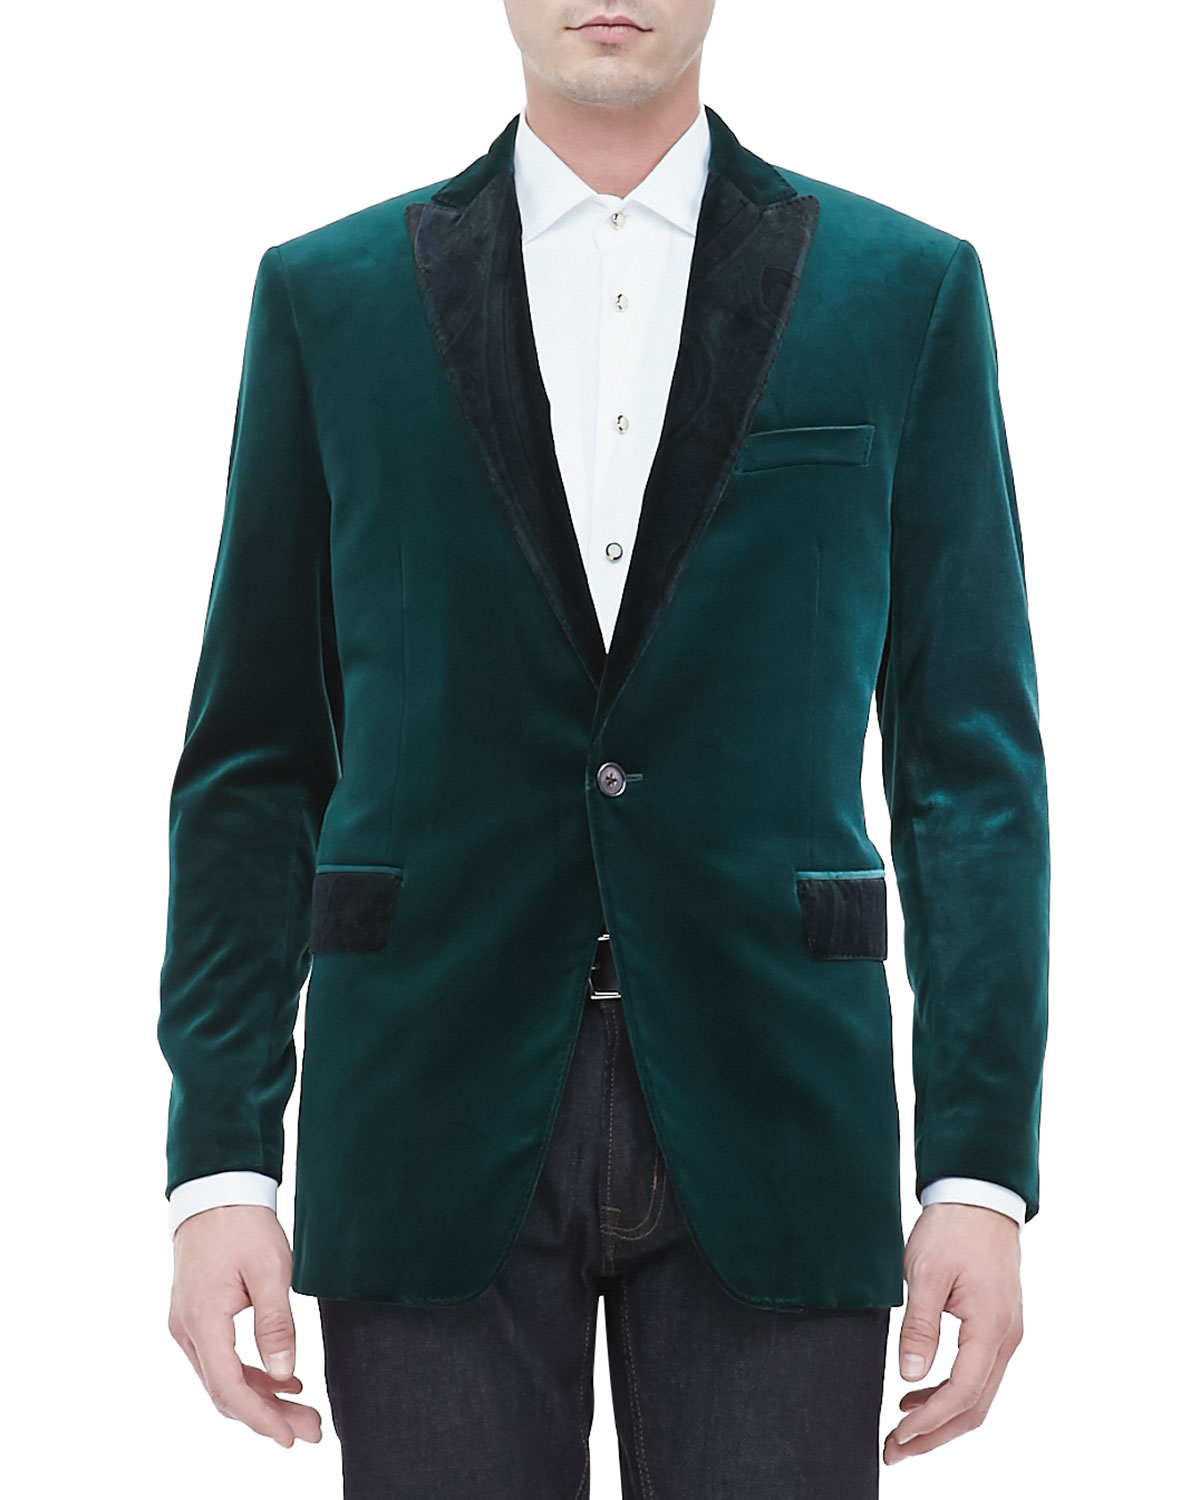 Lyst - Etro Velvet Evening Jacket with Paisley Lapel Emerald in Green ...